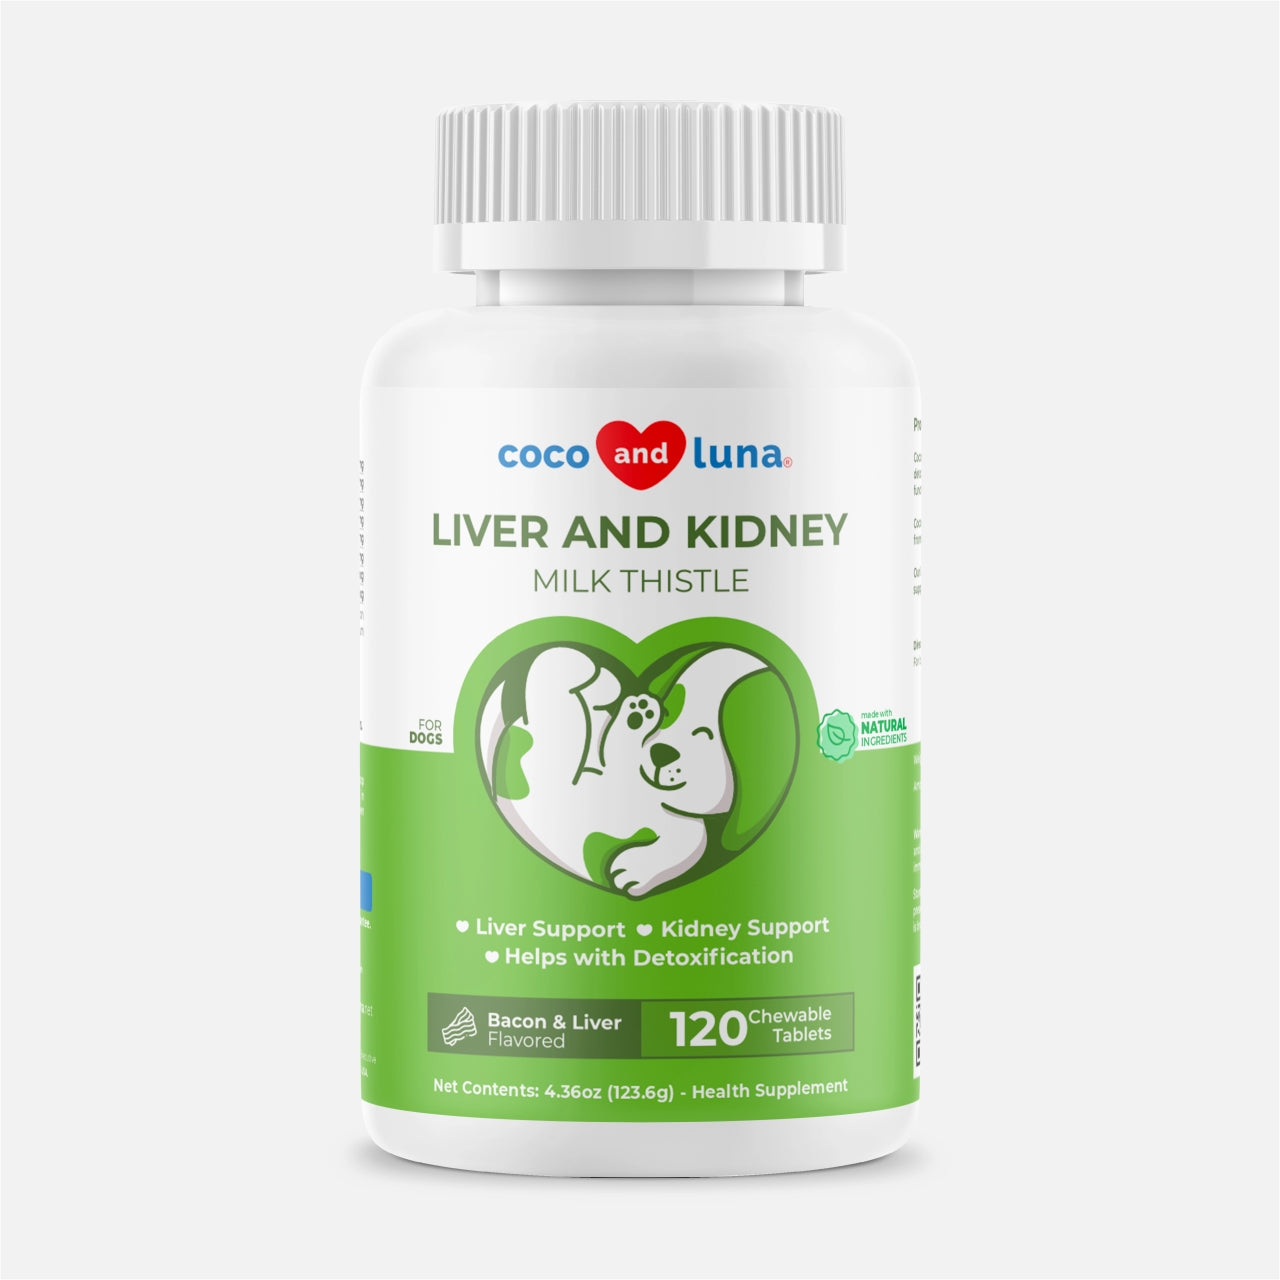 Liver and Kidney for Dogs - 120 Chewable Tablets - Coco and Luna